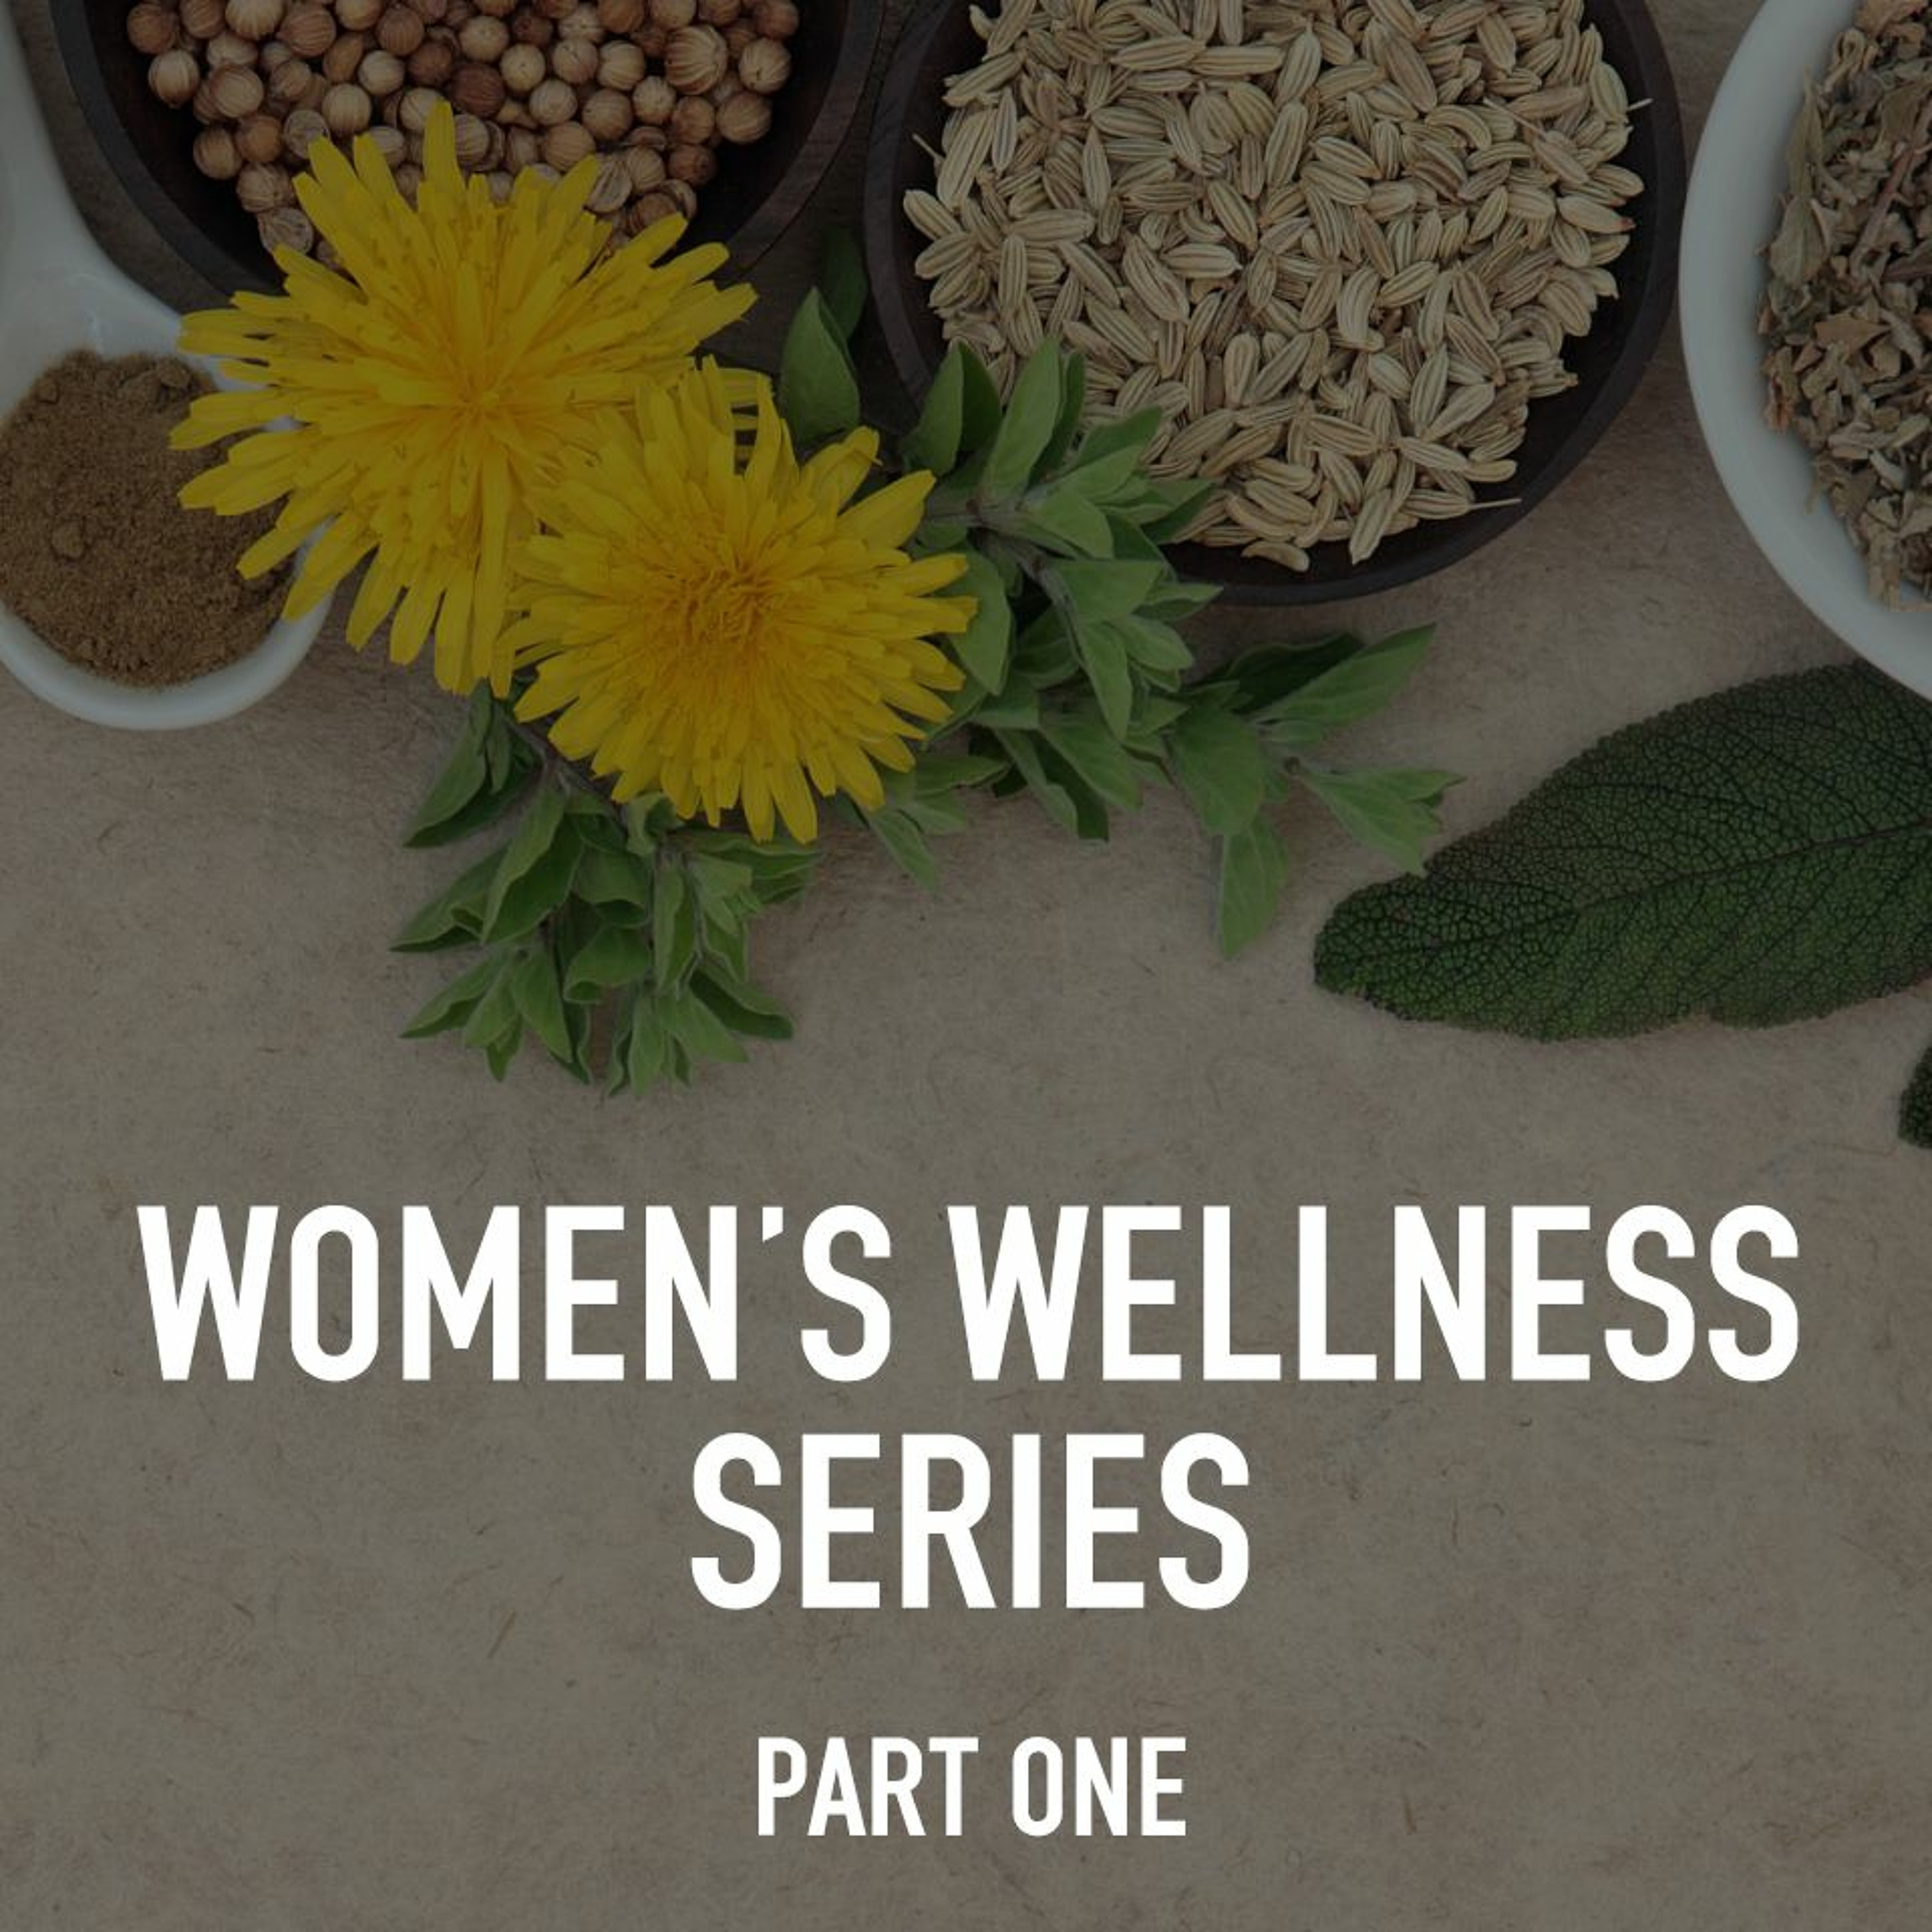 Women's Wellness Series, Part One with Coaches Melissa and Jess